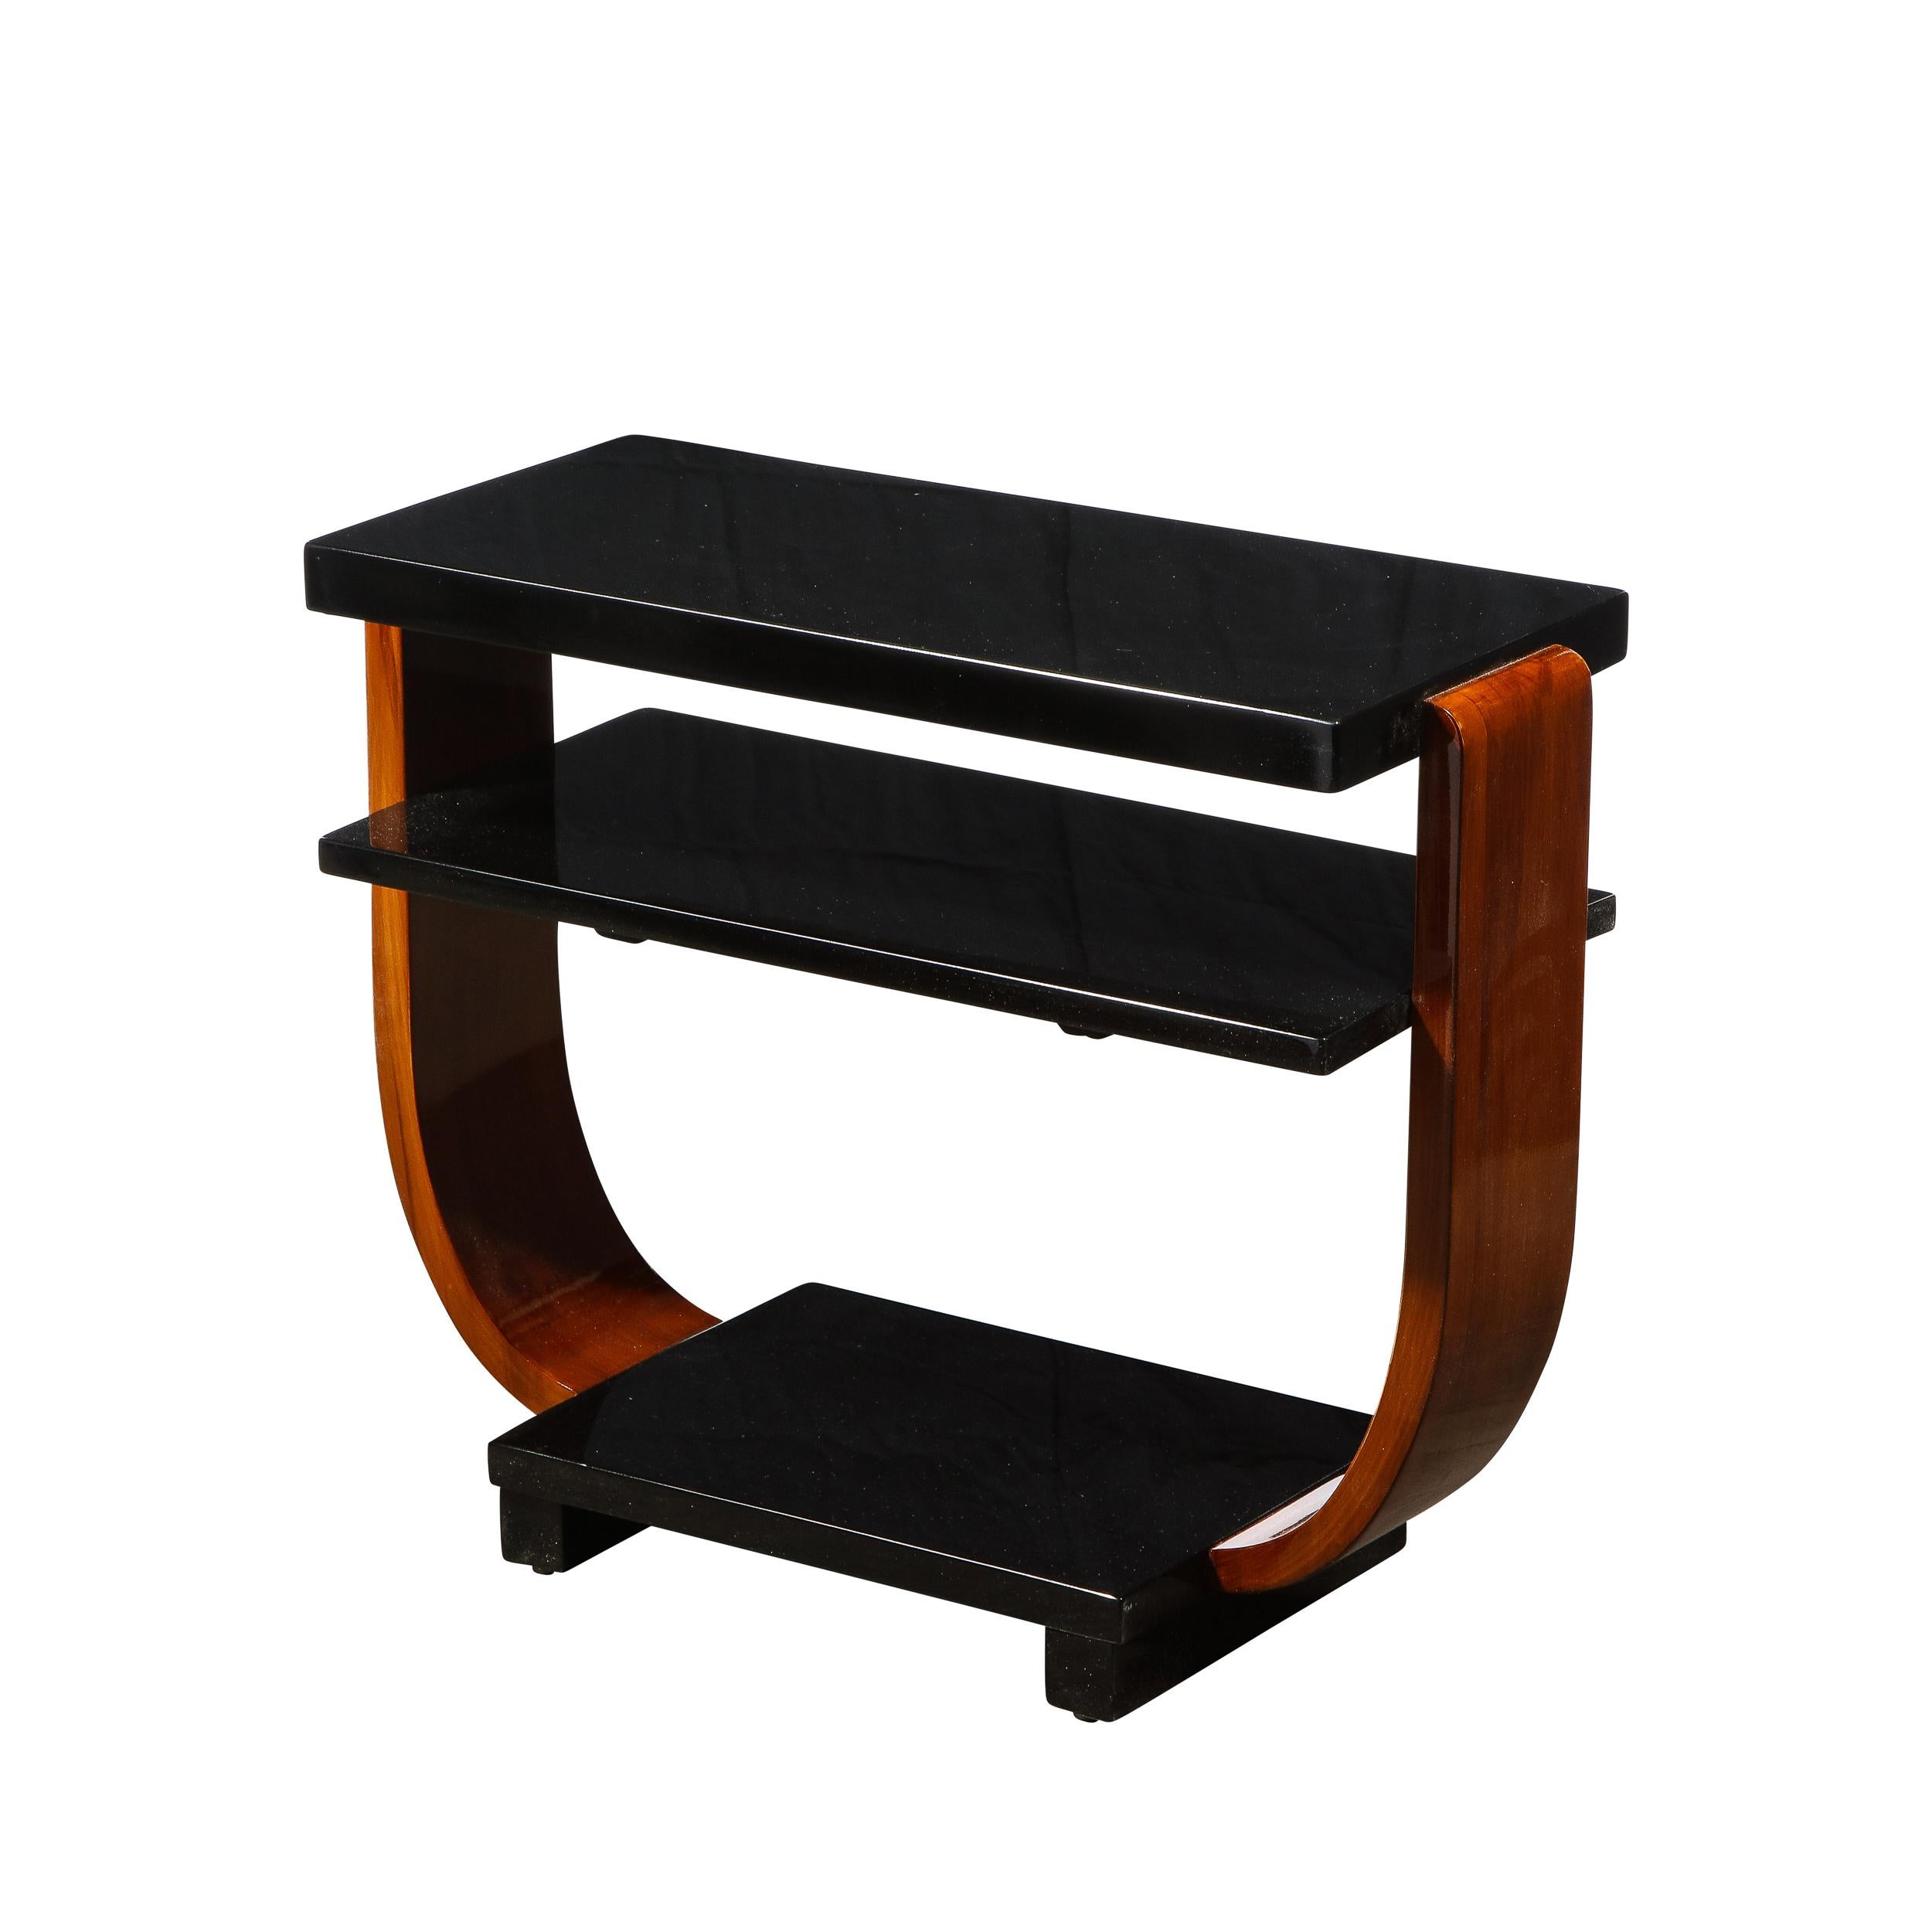 Mid-20th Century 1930s Streamline Art Deco Walnut and Black Lacquer Two Tier Side Tables